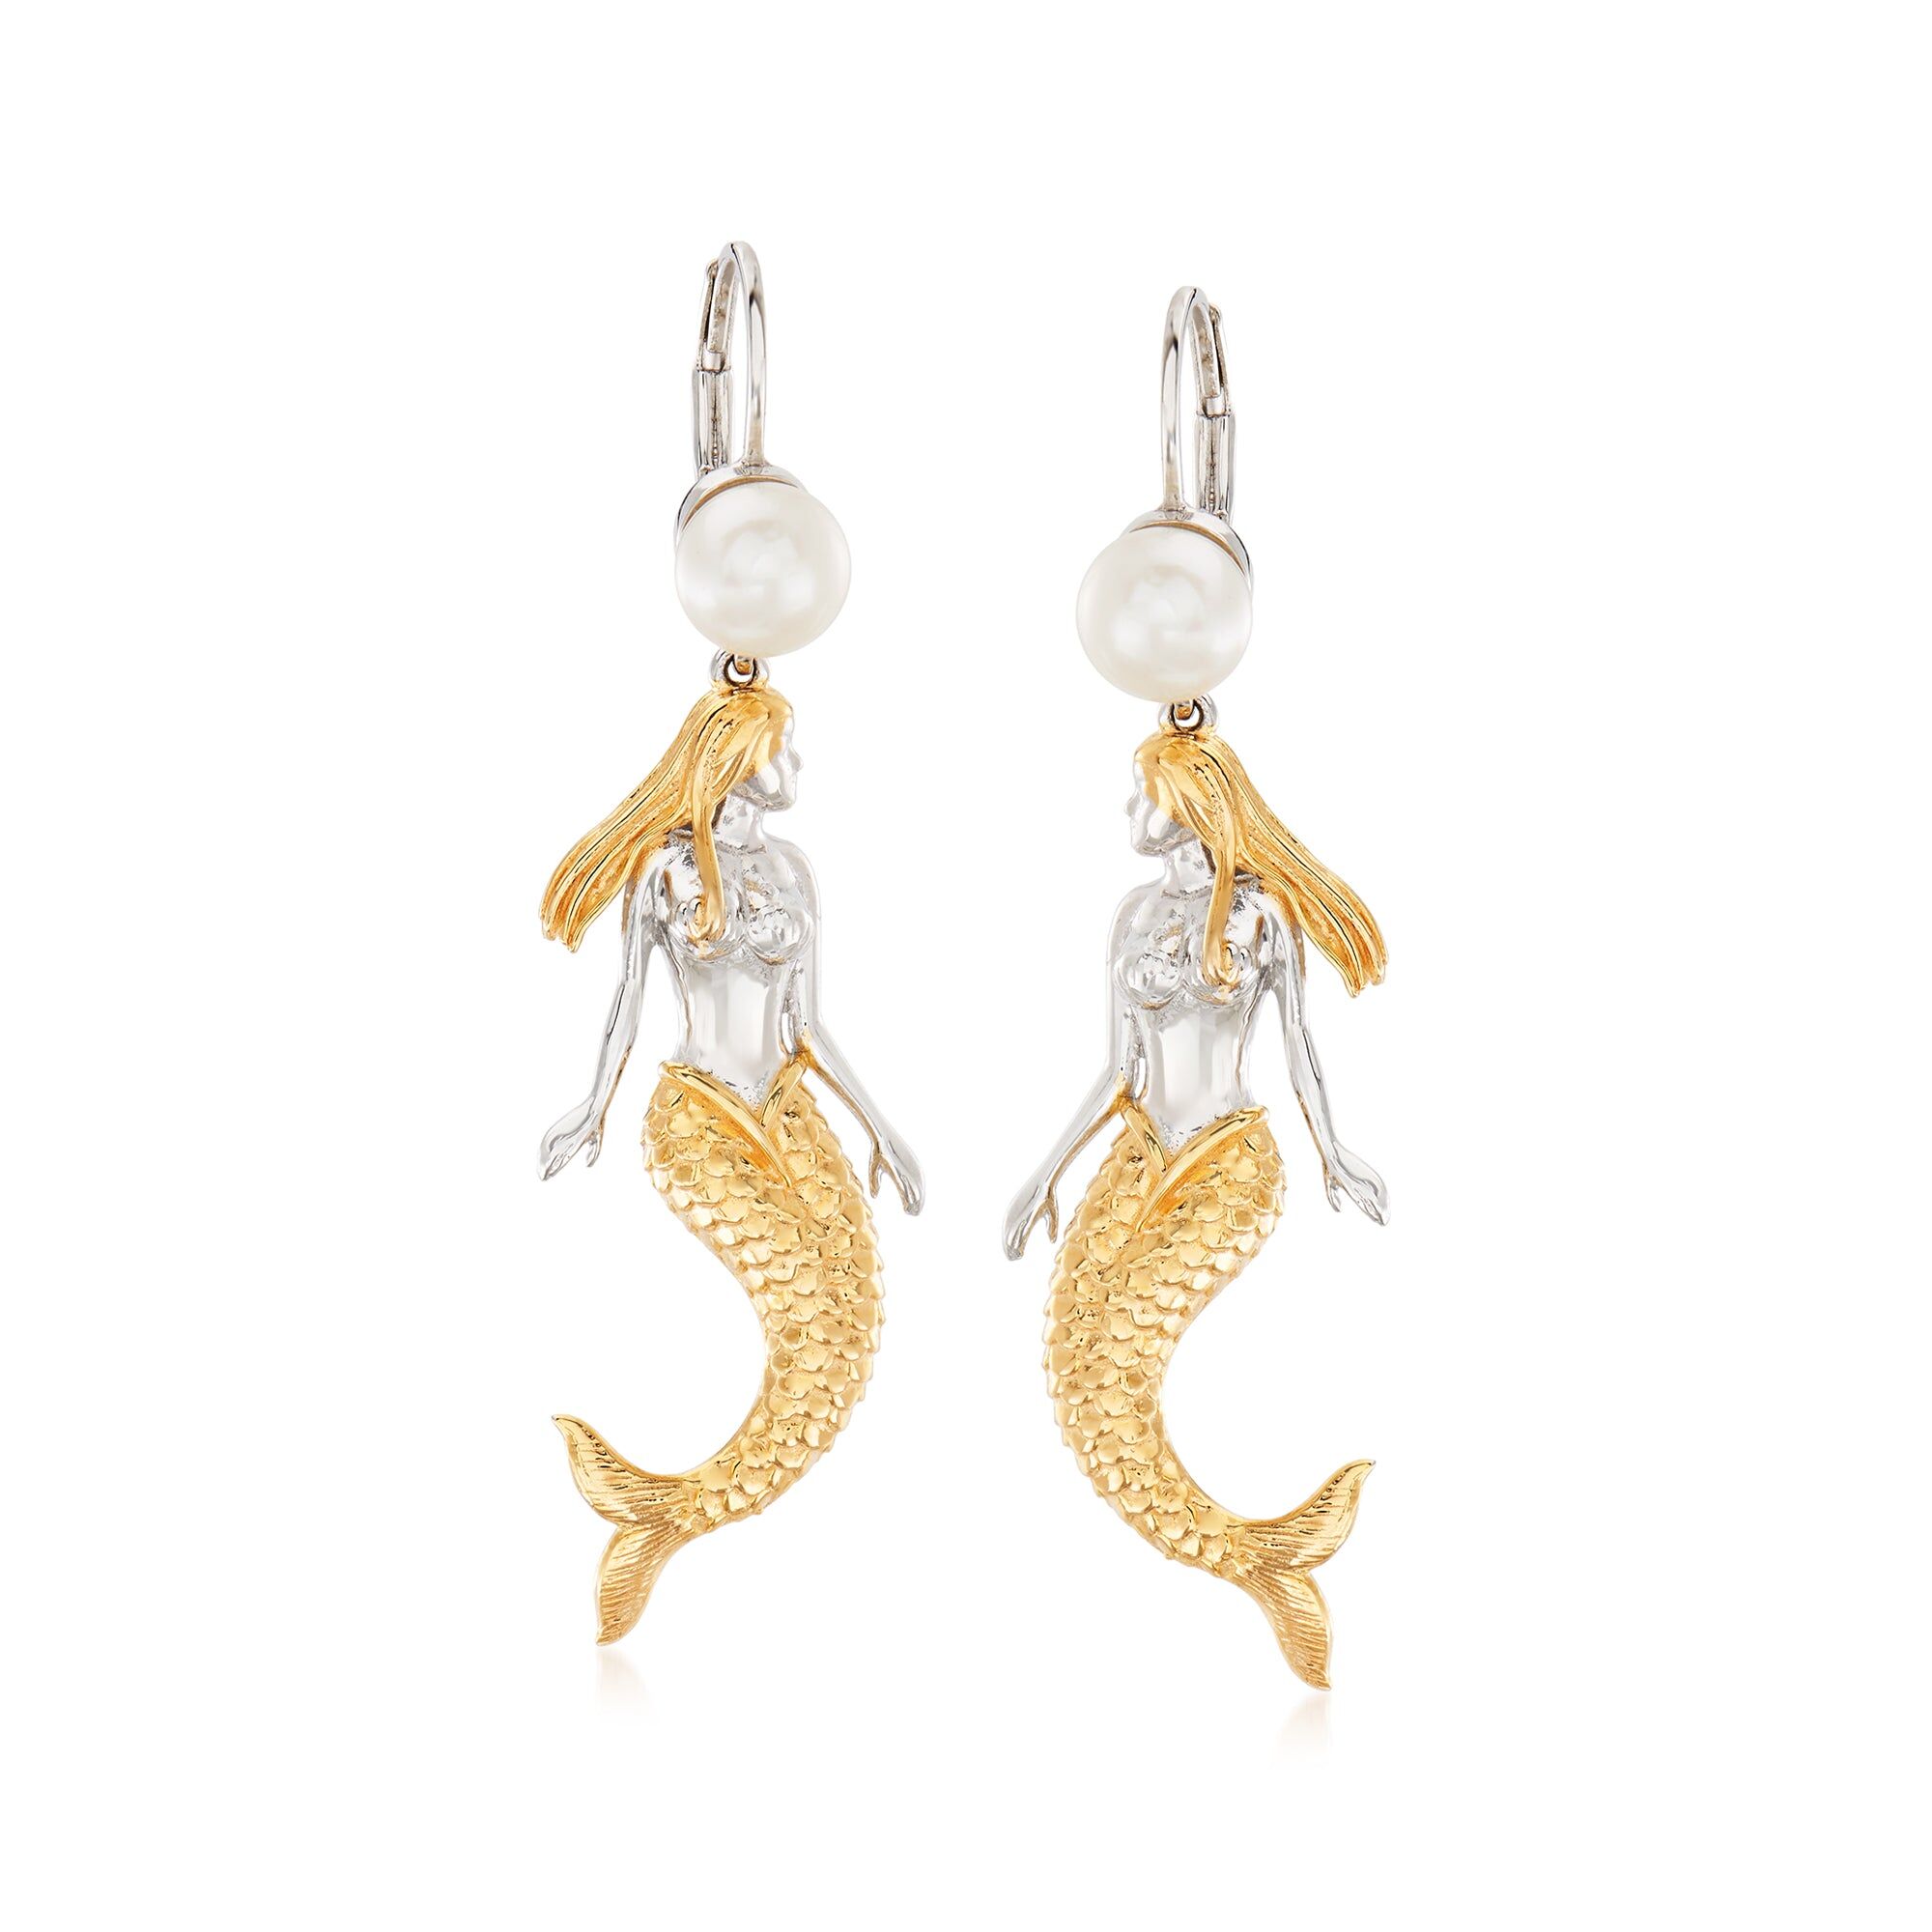 Ross-Simons 6.5-7mm Cultured Pearl Mermaid Drop Earrings in Sterling Silver and 18kt Gold Over Sterling female